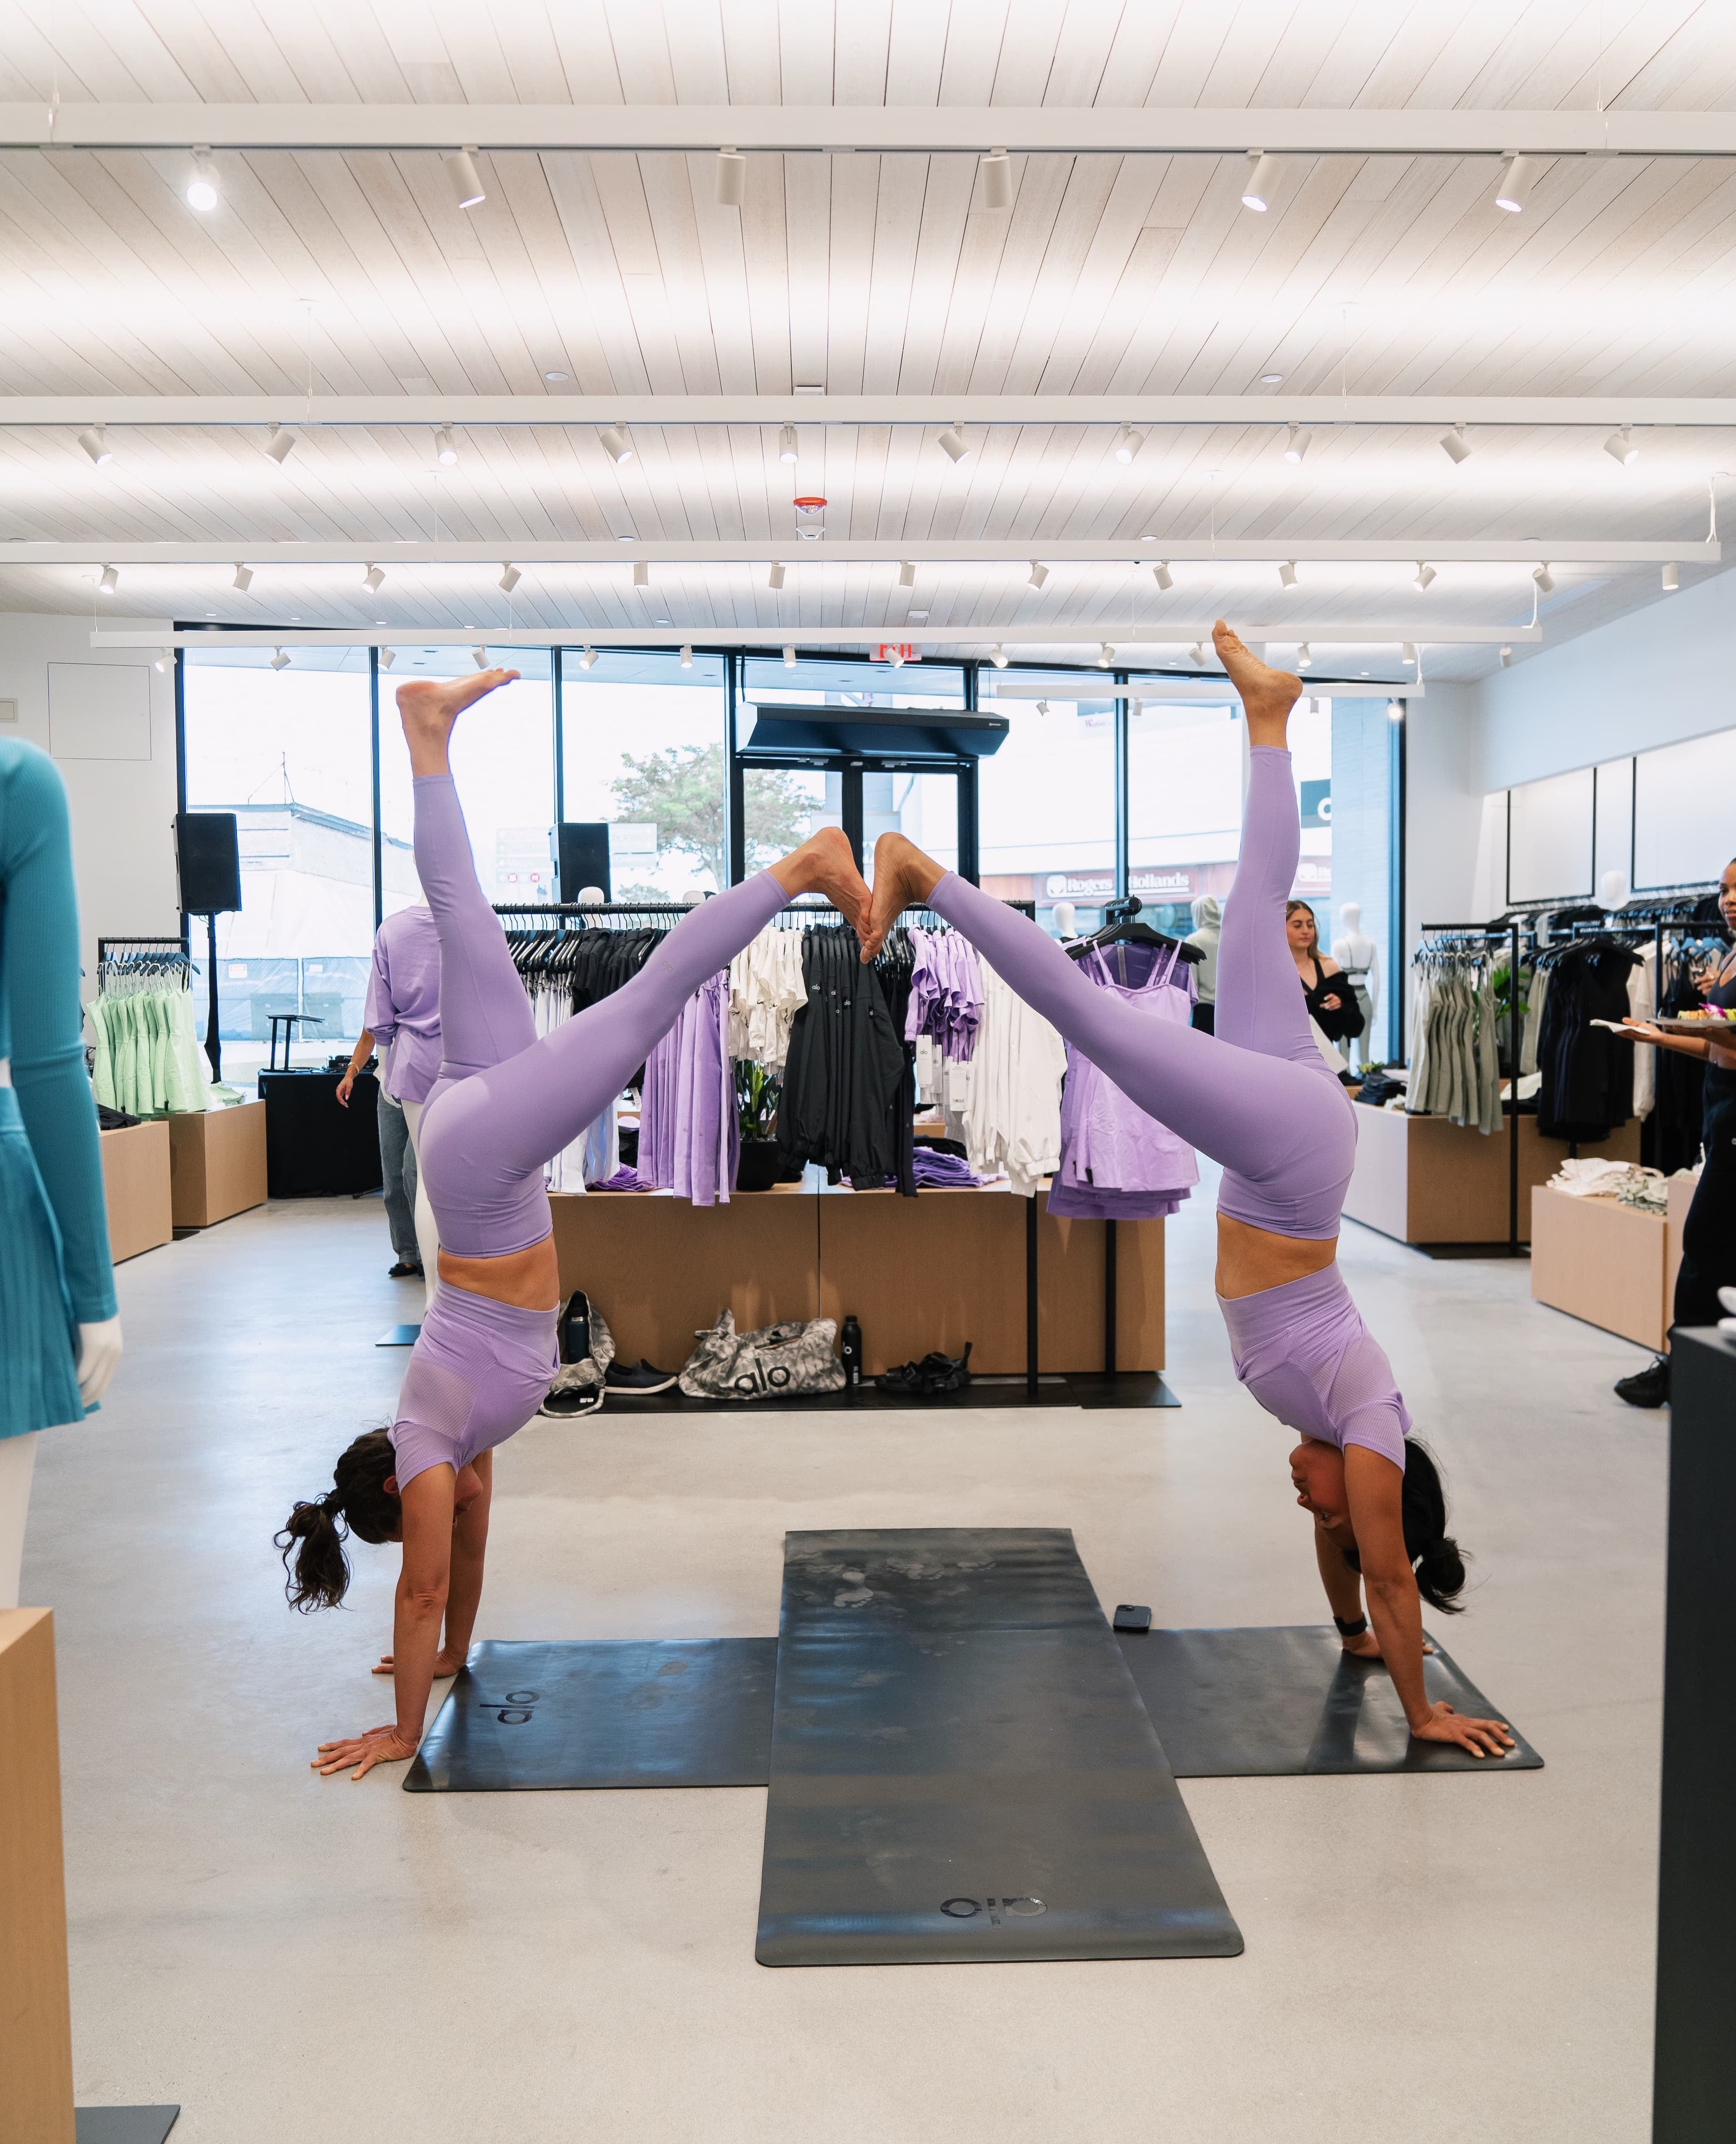 A photo of two women in handstands with one of each of their feet touching the other person’s in the middle of the Alo Old Orchard store wearing purple workout sets.  